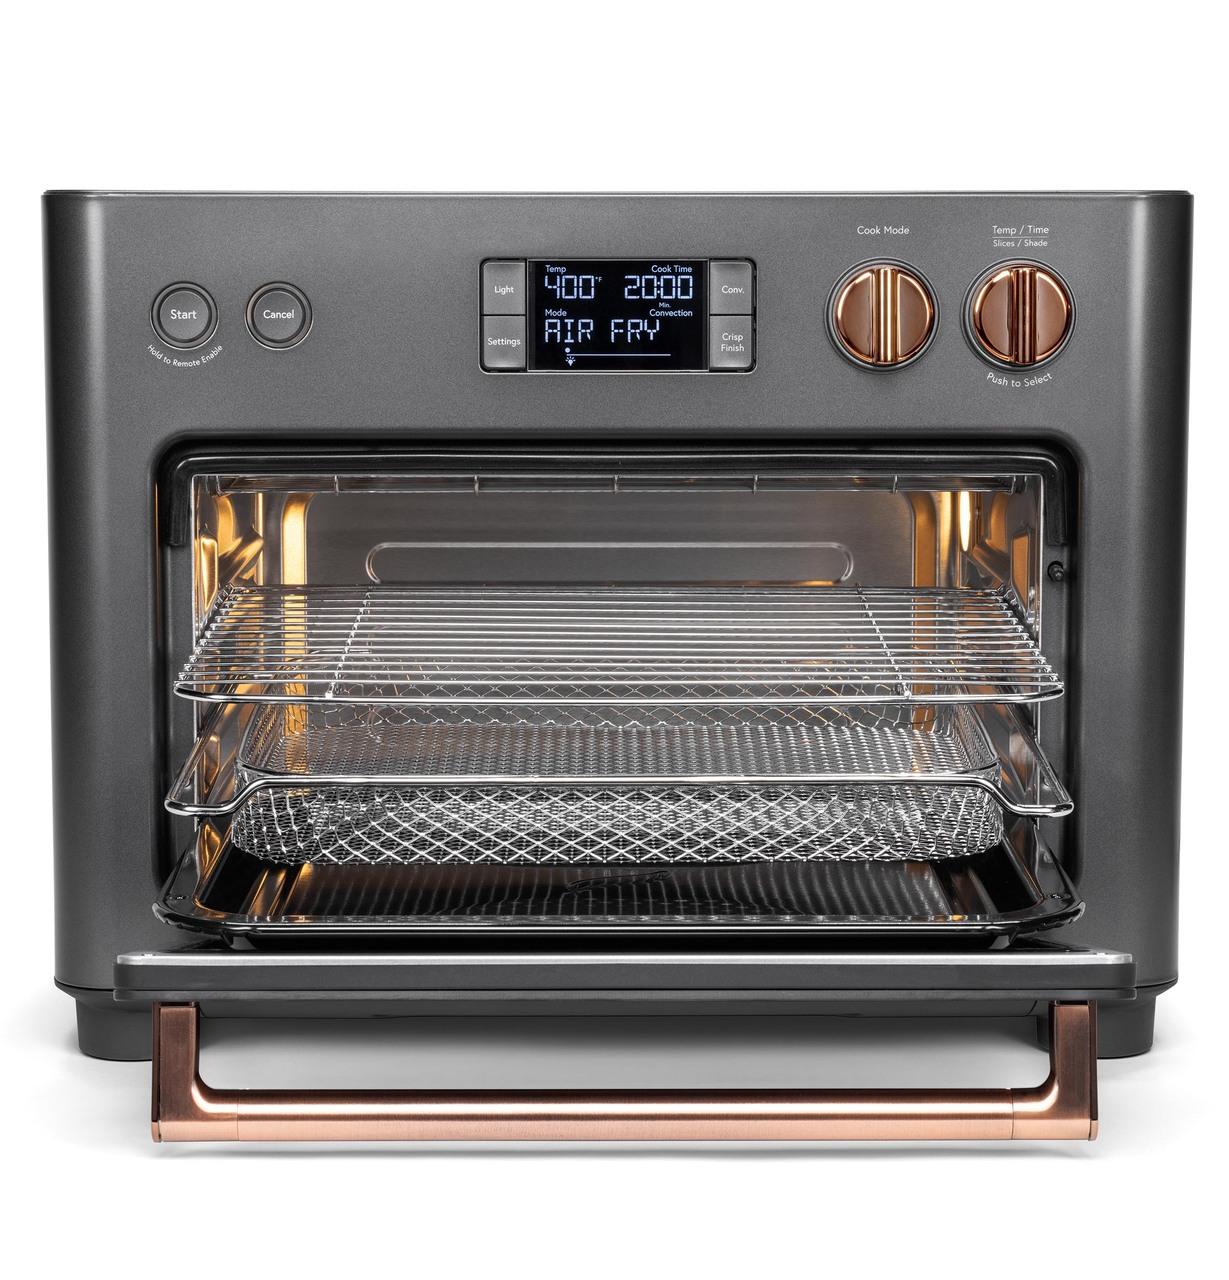 Cafe Caf(eback)™ Couture™ Oven with Air Fry